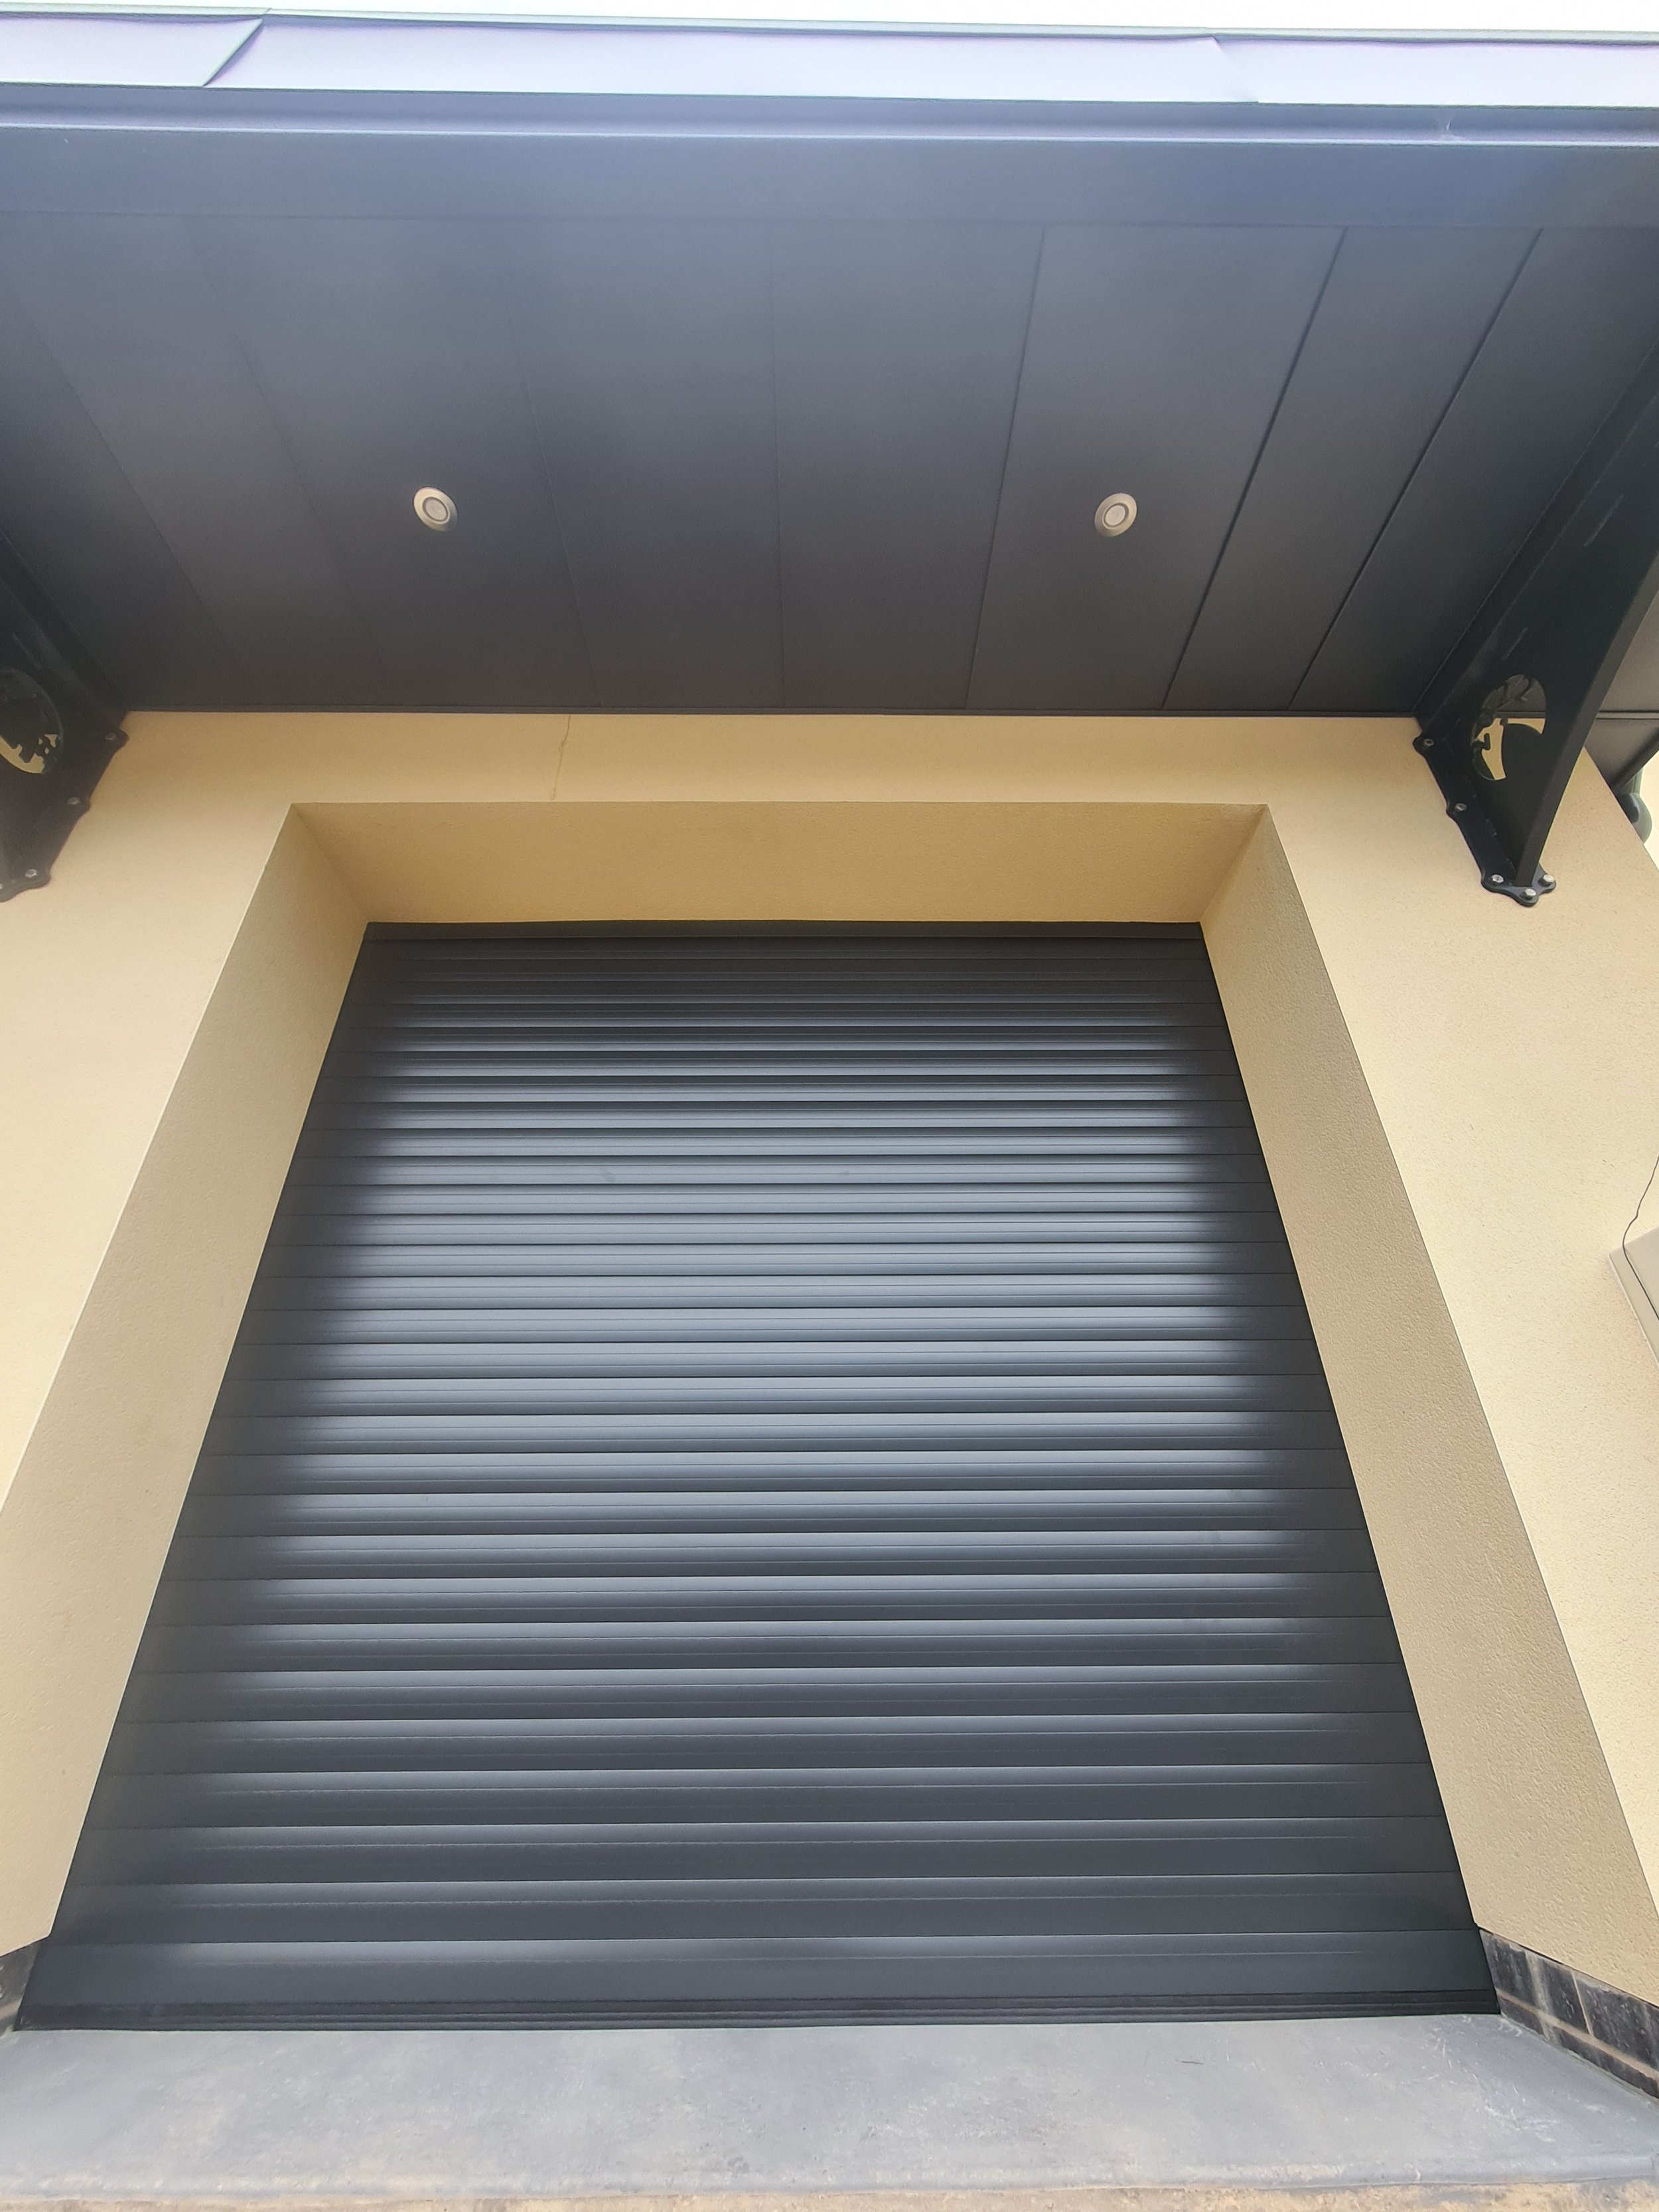 Uk Doors Midlands Classic 77m fully insulated roller garage door in smooth Anthracite grey W/ matching frame